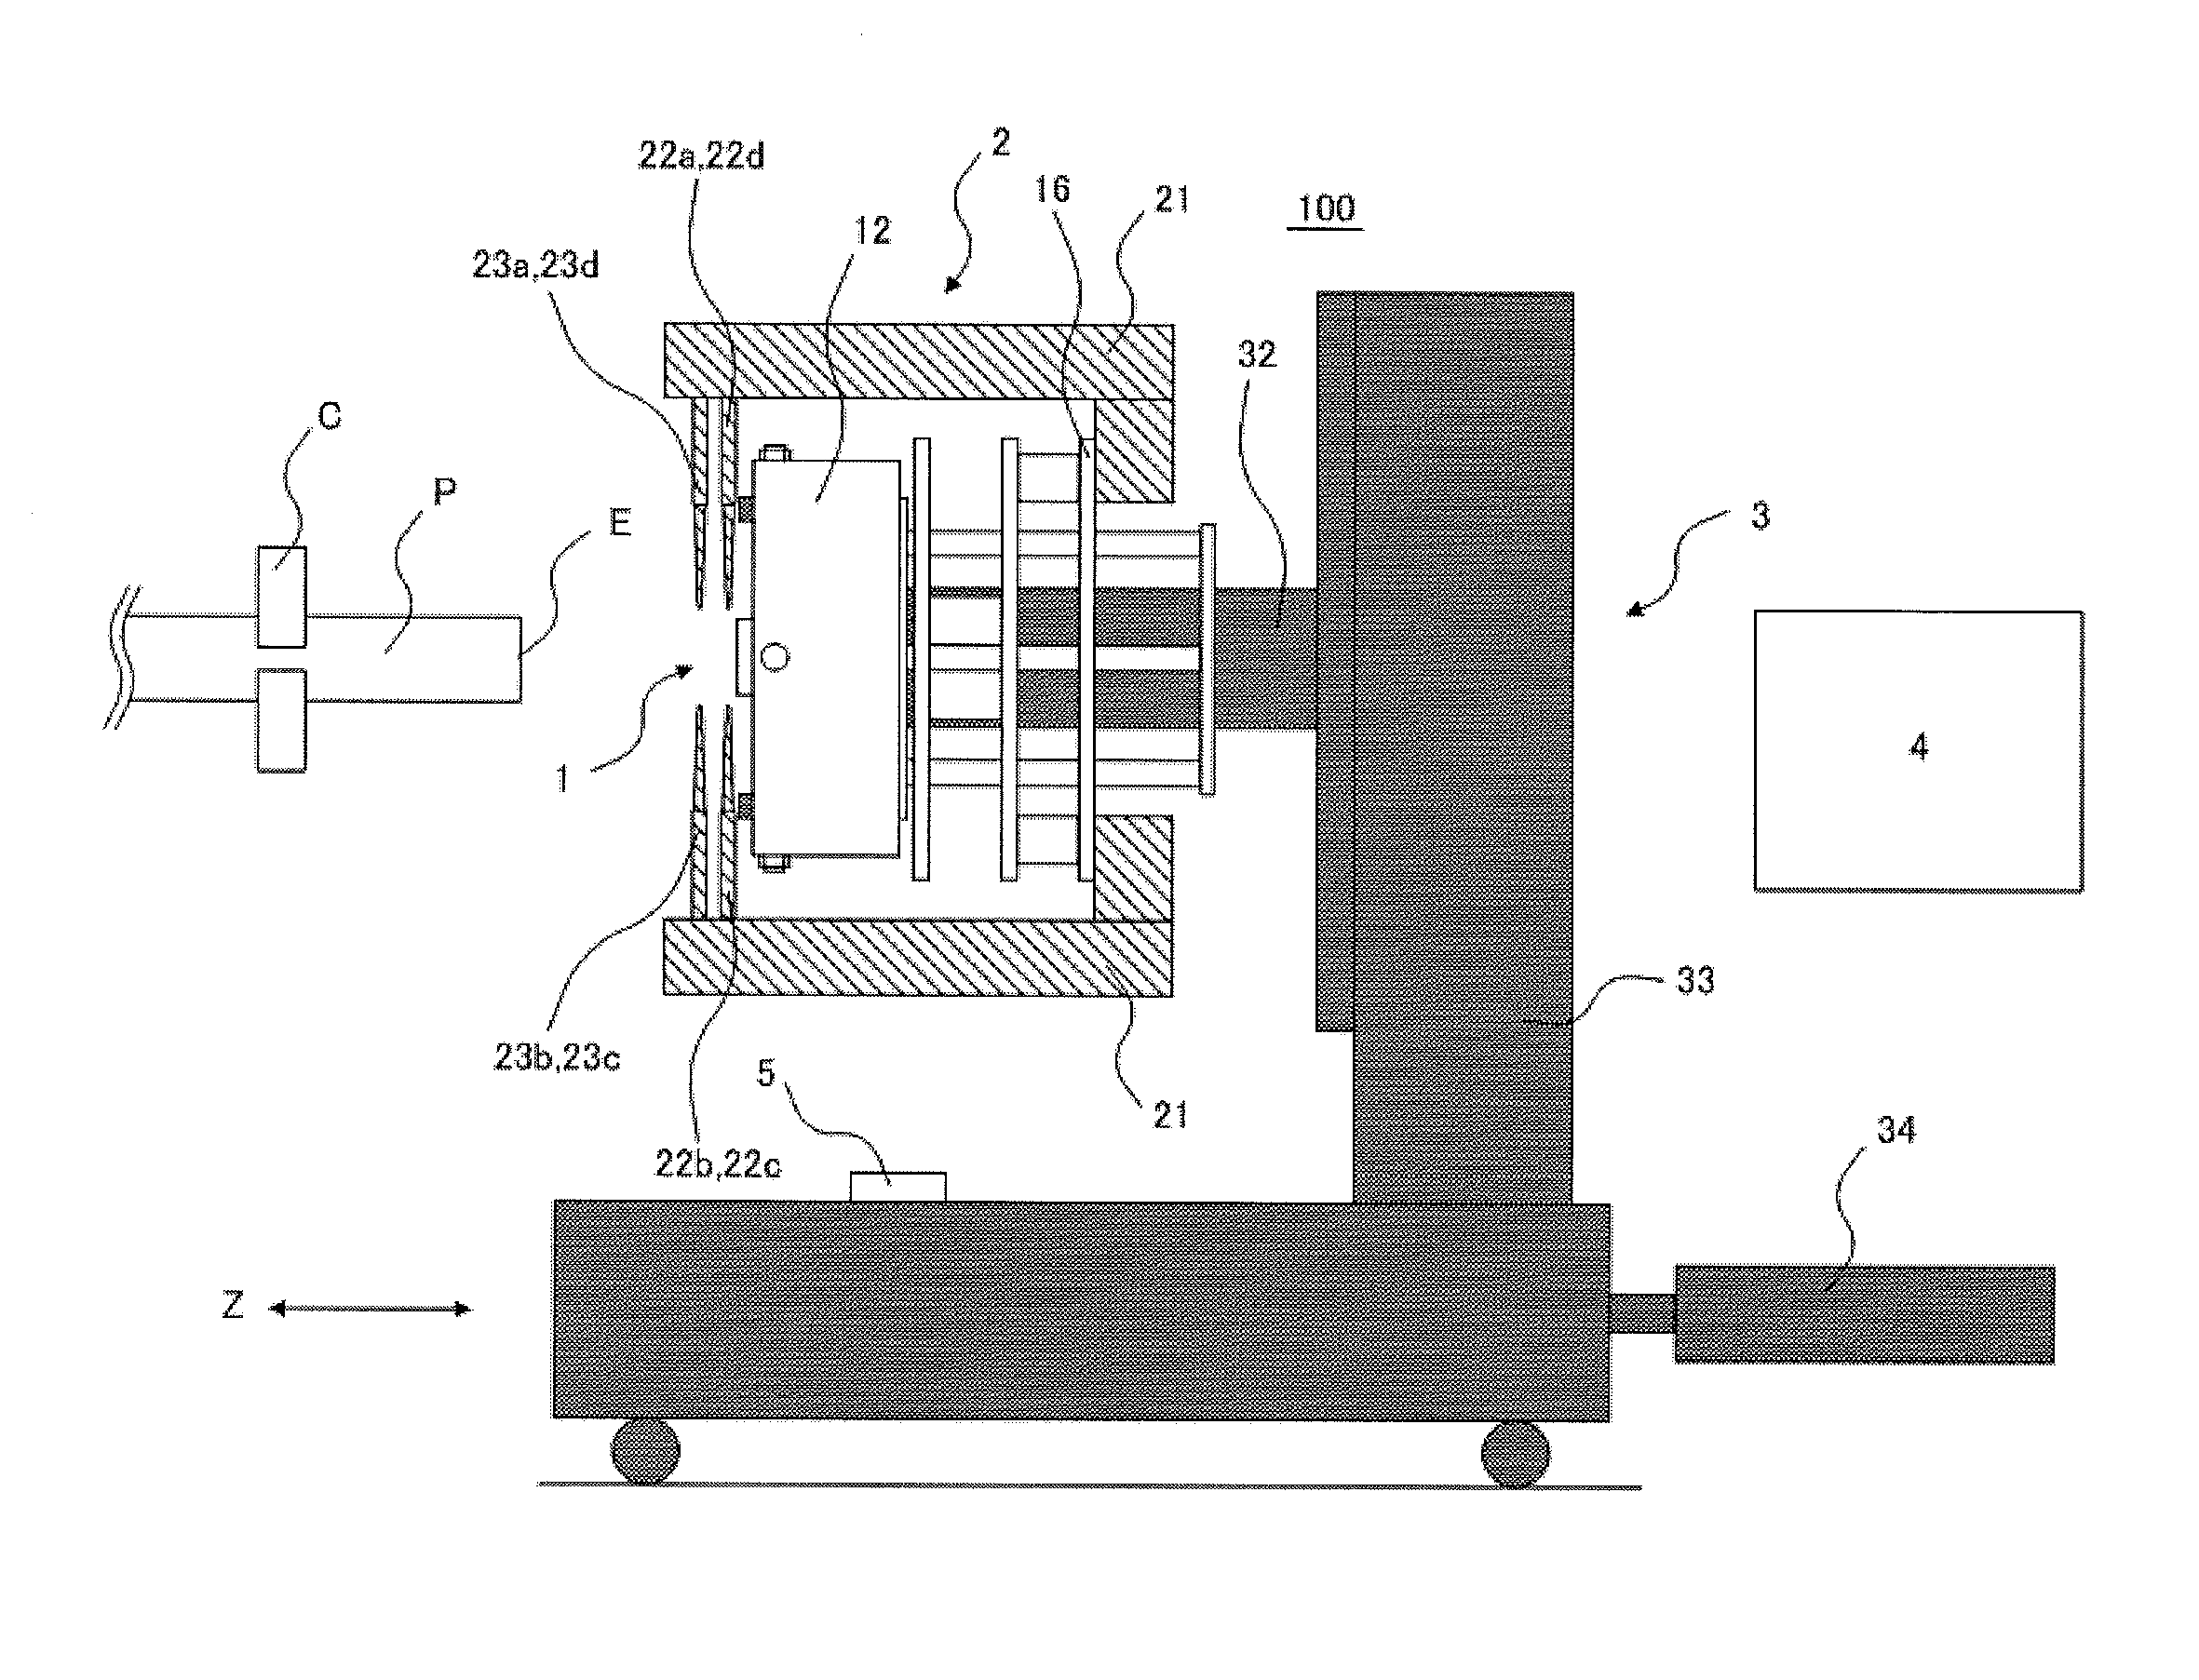 Dimension measuring device for long material